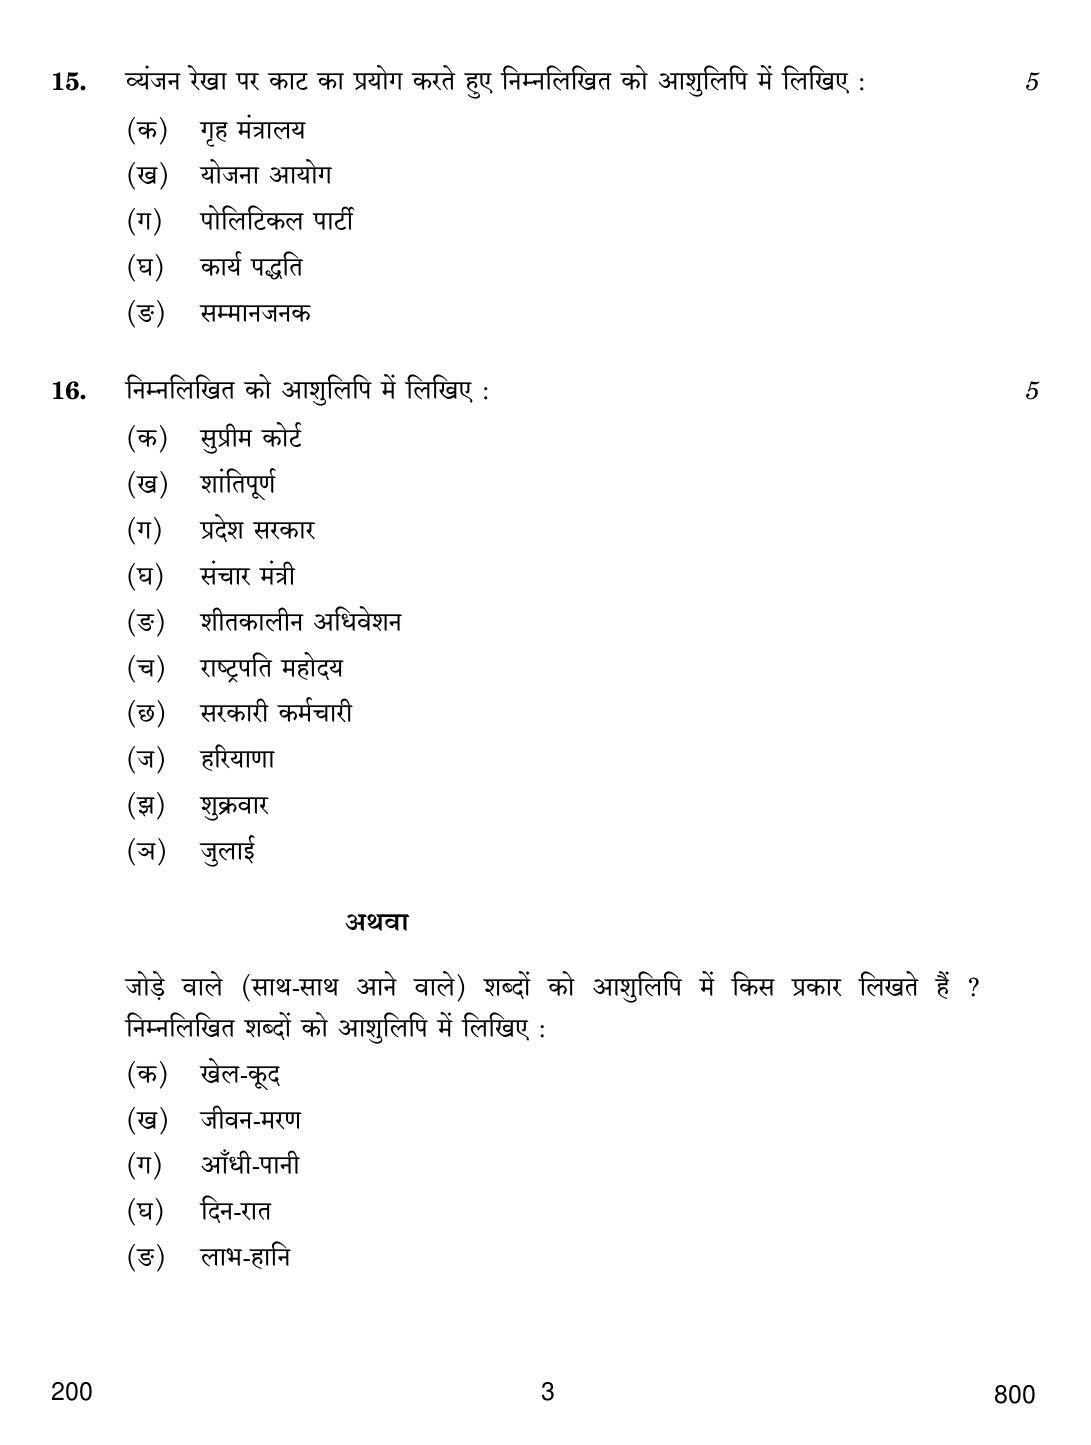 CBSE Class 12 200 SHORTHAND HINDI 2018 Question Paper - Page 3